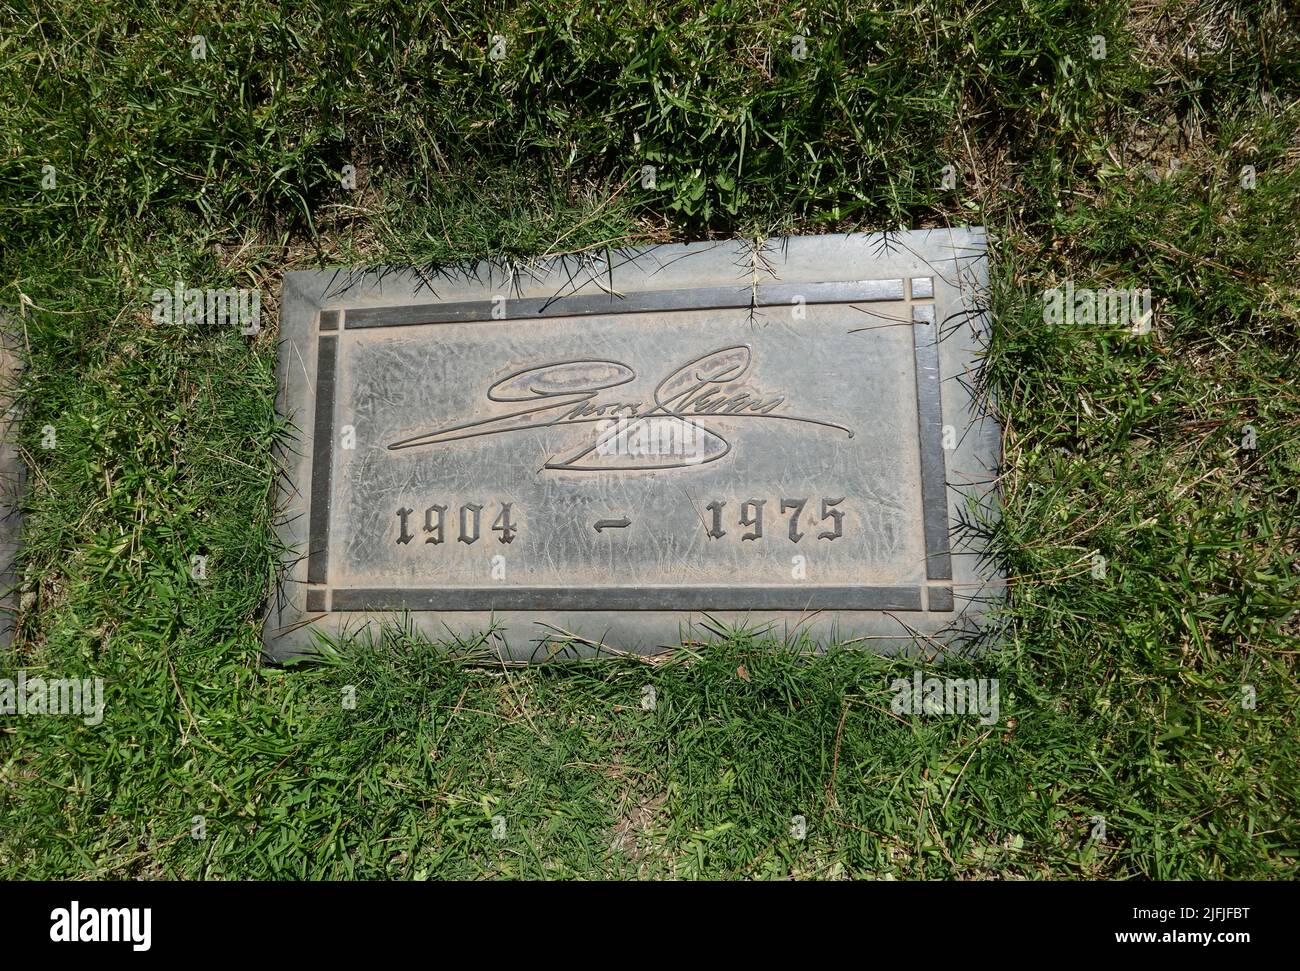 Los Angeles, California, USA 19th June 2022 Director George Stevens Grave in Morning Light Section at Forest Lawn Memorial Park Hollywood Hills on June 19, 2022 in Los Angeles, California, USA. Photo by Barry King/Alamy Stock Photo Stock Photo